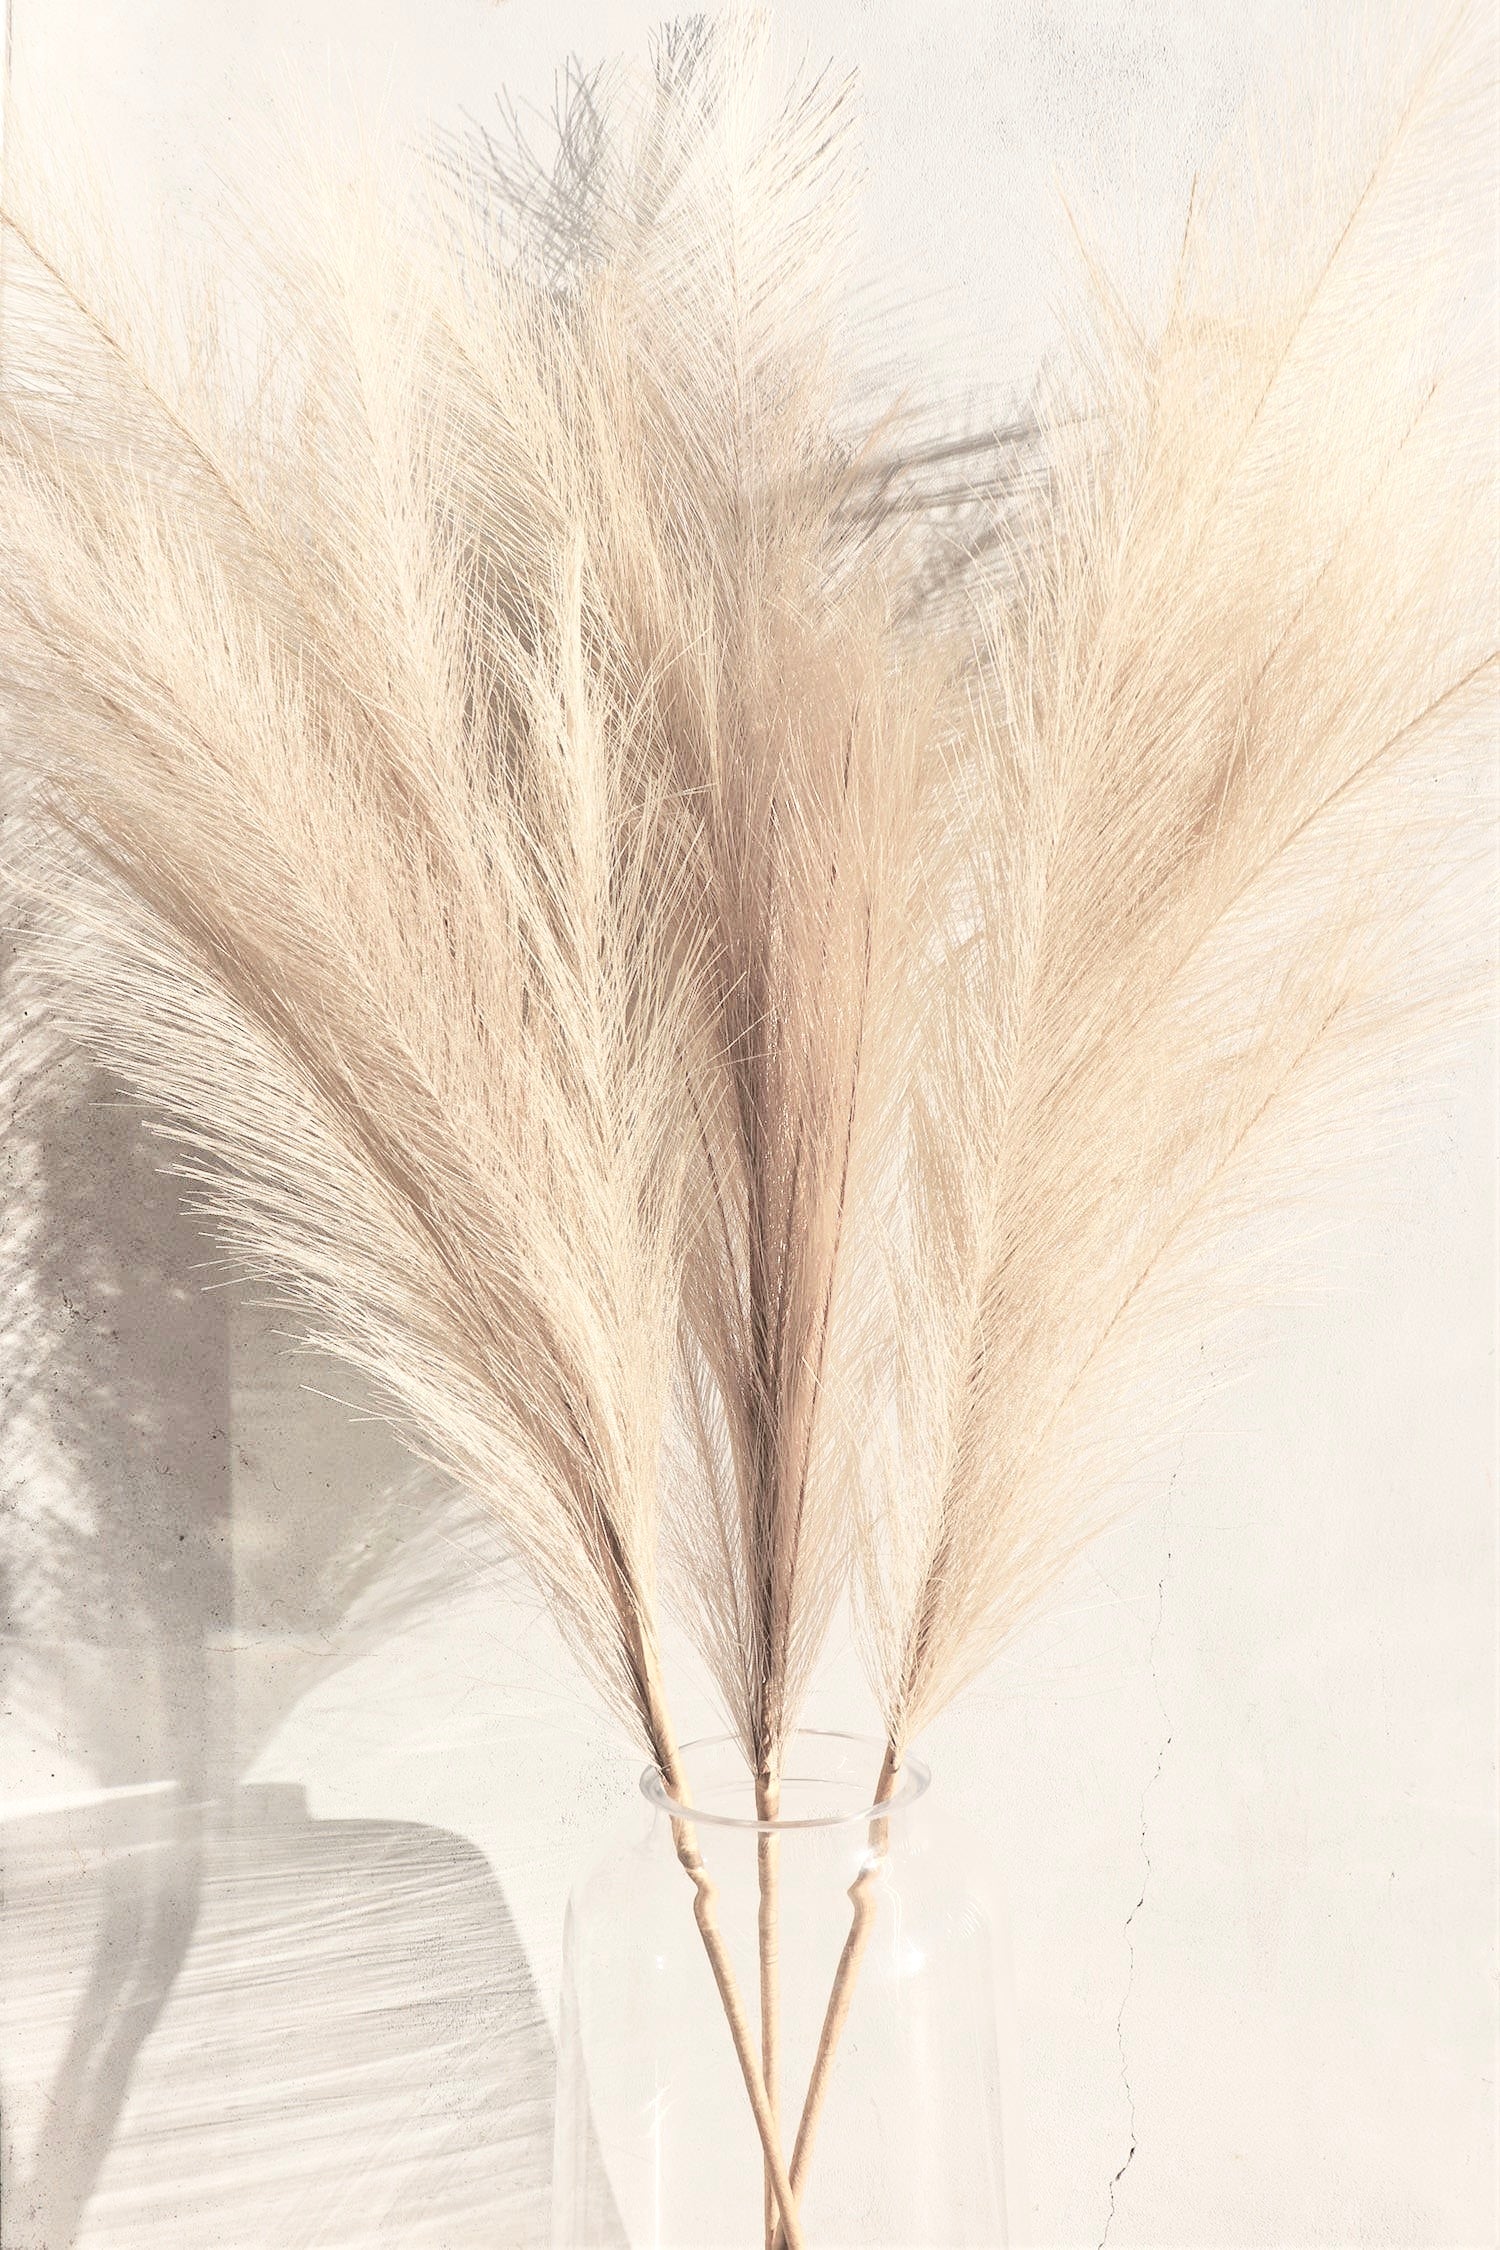 Large Cream Faux Pampas Grass - Individual